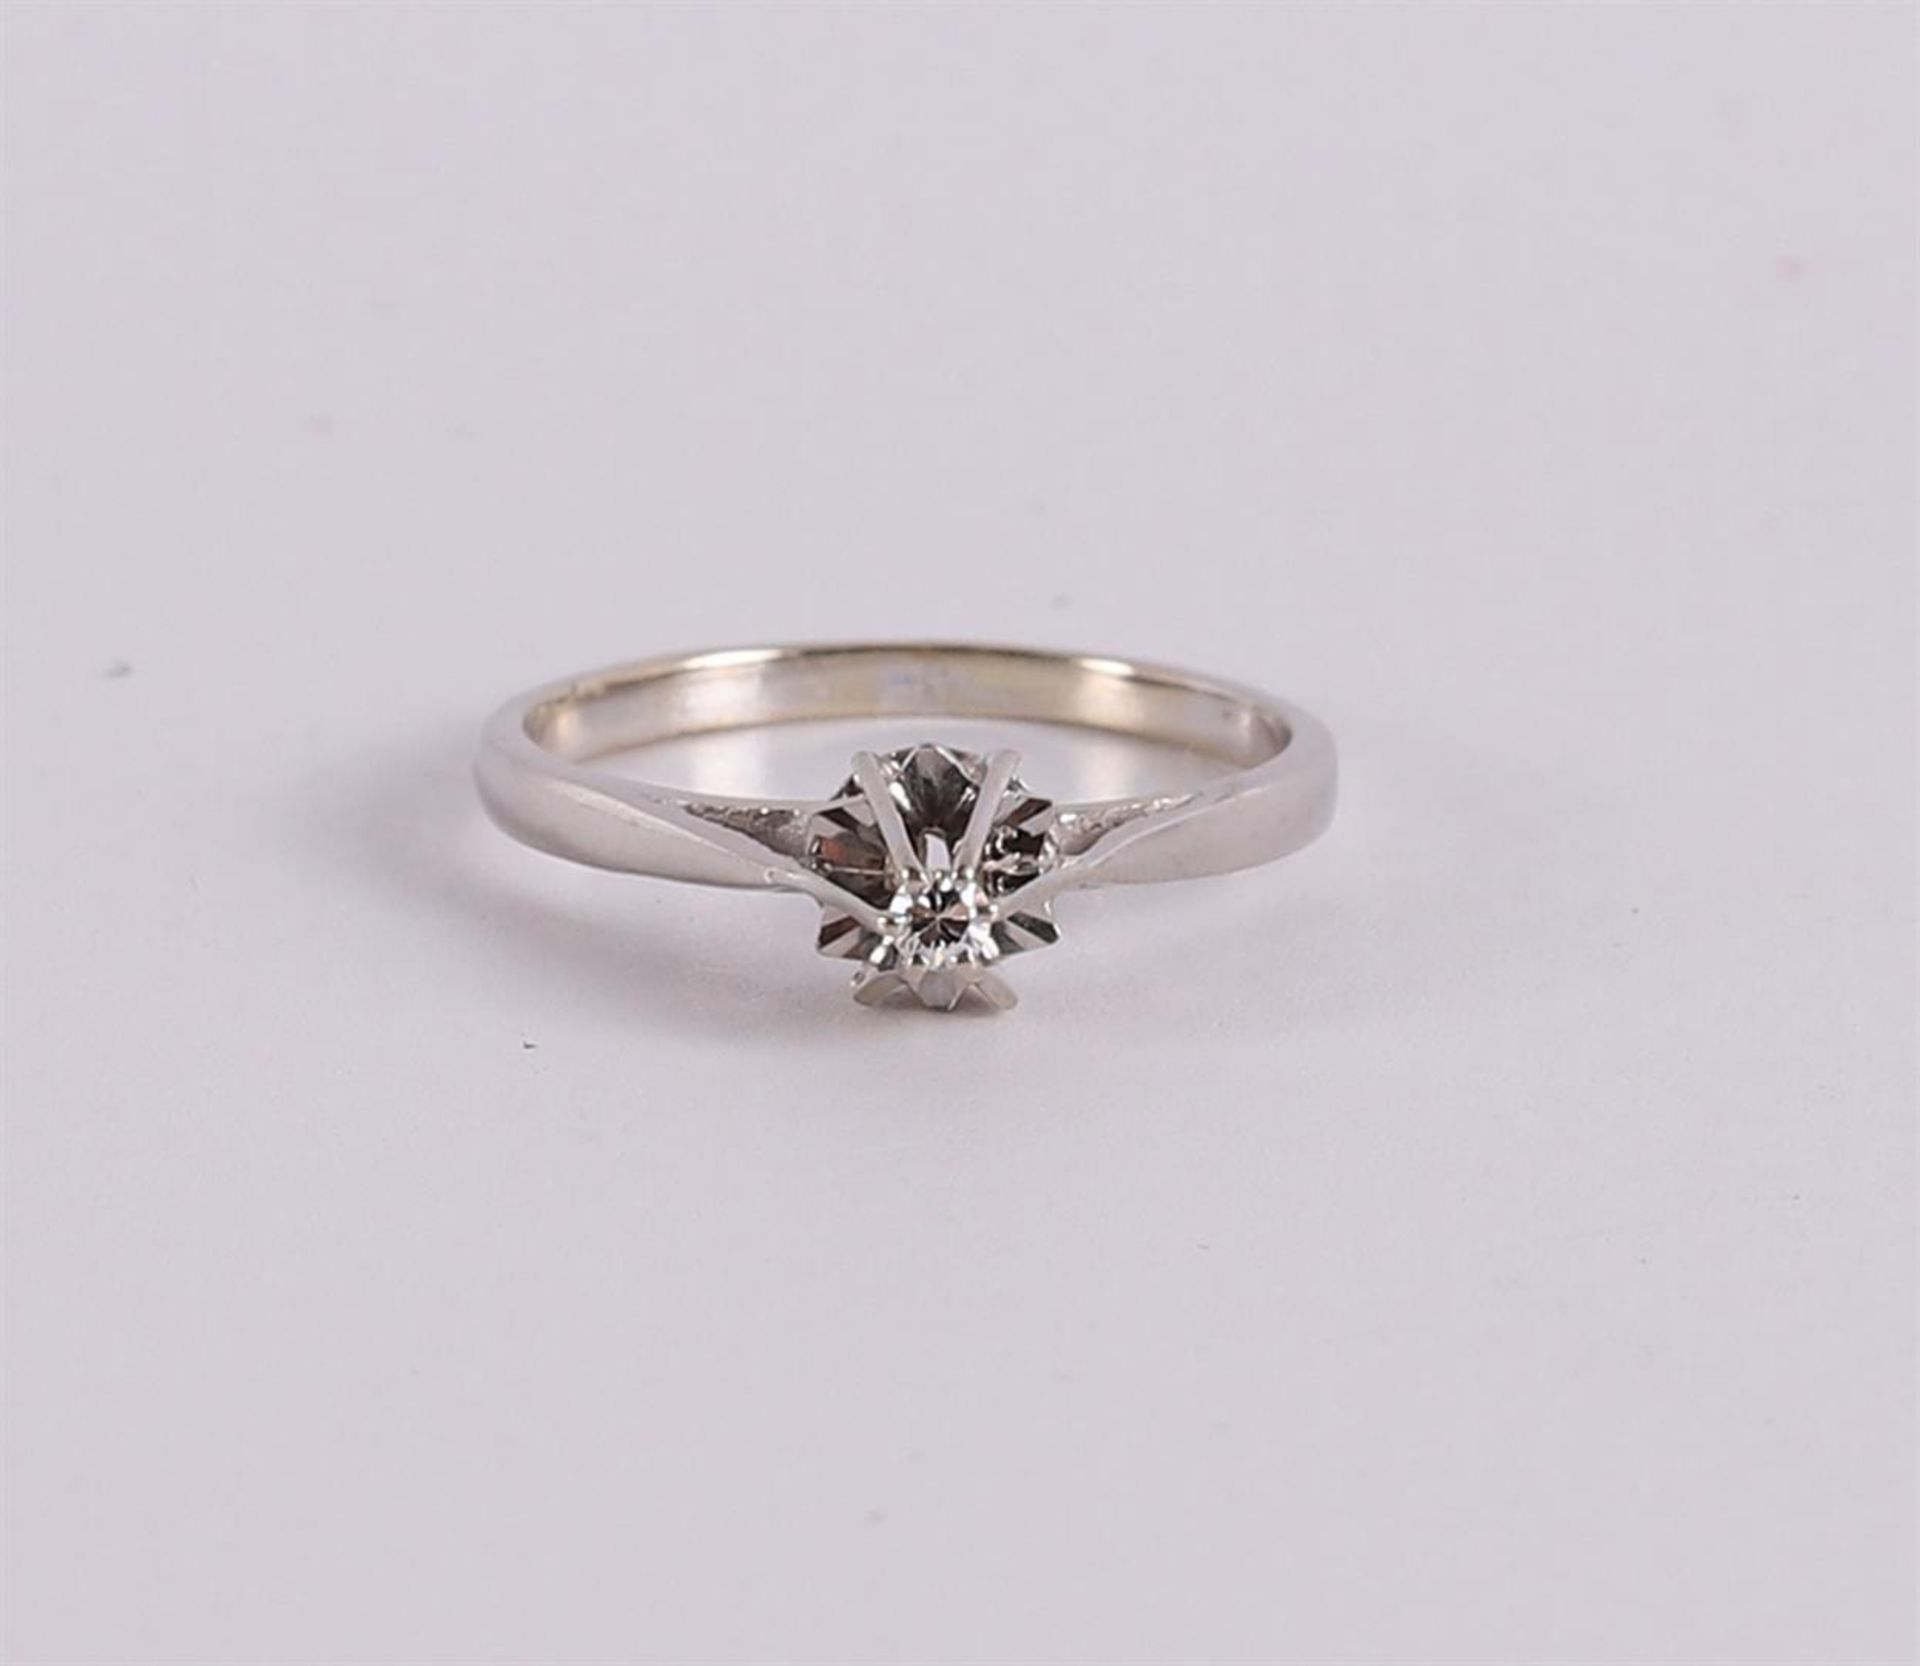 An 18 kt gold solitaire ring with a brilliant cut diamond.